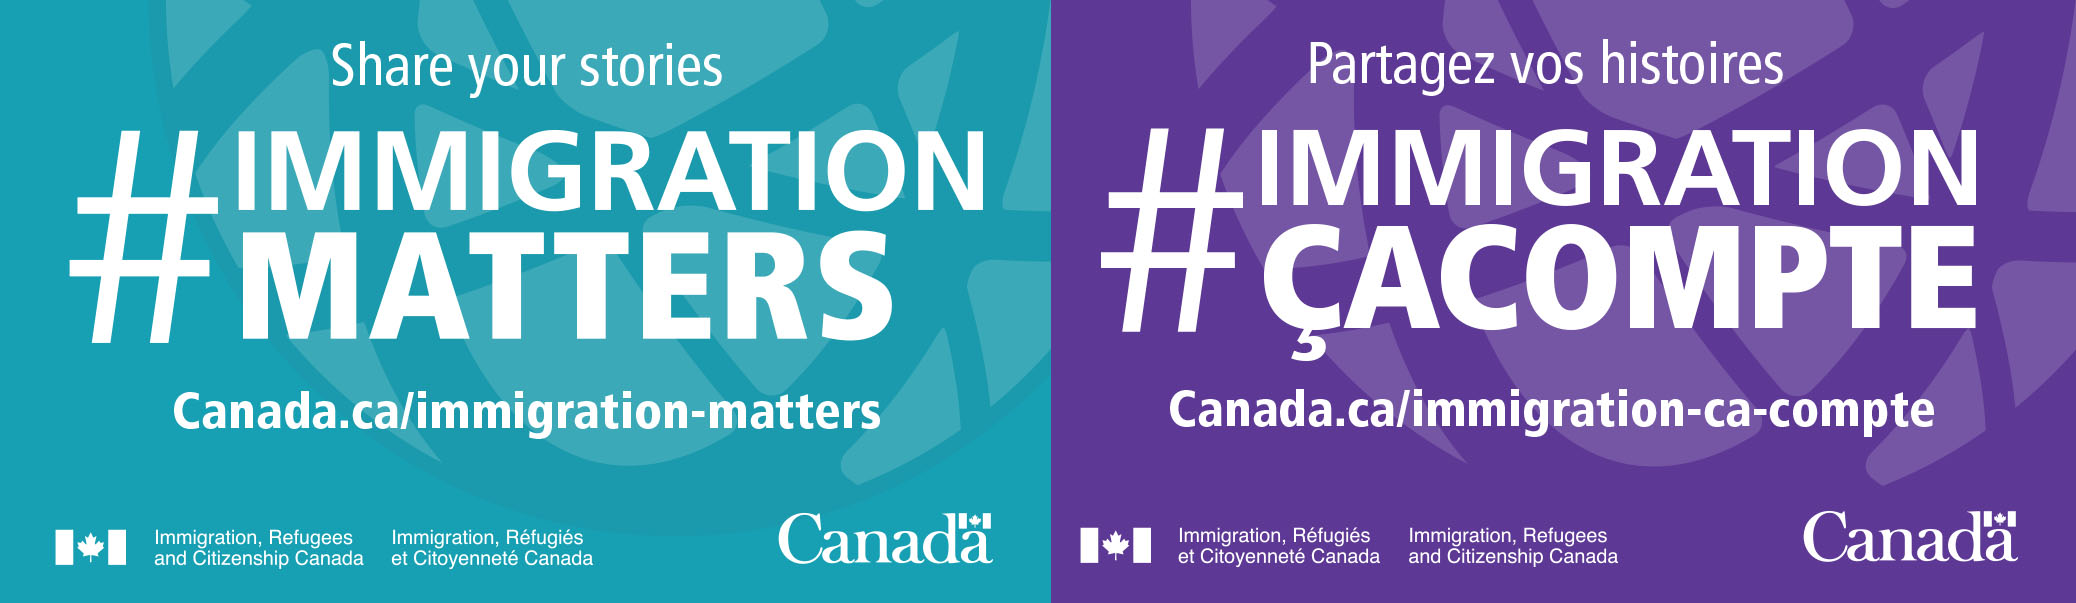 Example of business card design. One side is in English: “Share your stories #ImmigrationMatters” with a link to Canada.ca/immigration-matters. The other side is in French: “Partagez vos histoires #ImmigrationÇaCompte” with a link to Canada.ca/immigration-ça-compte.